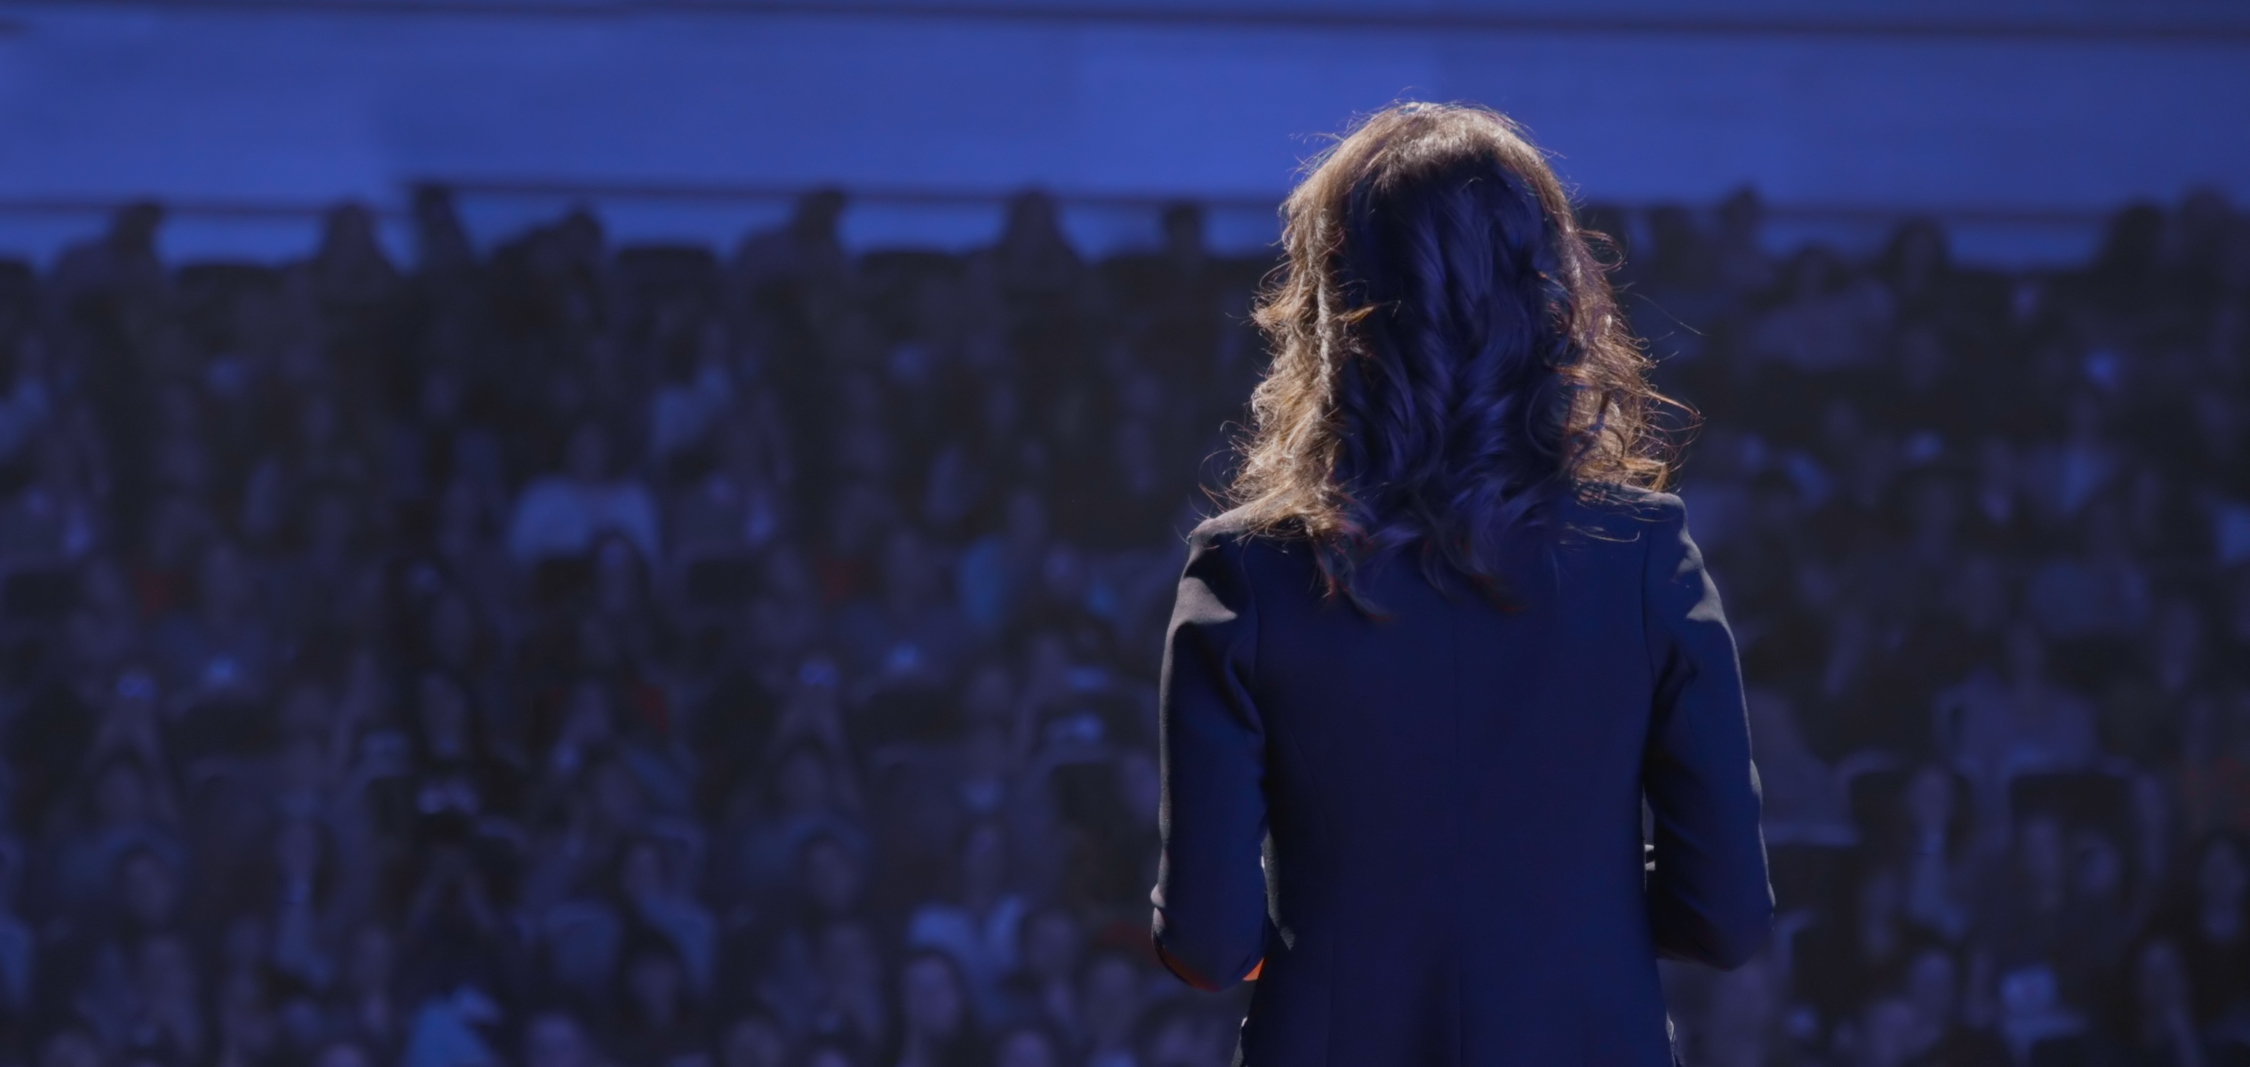 Woman standing on a stage at a national sales meeting with the spotlight on her, her back is to the camera, she faces a full audience in a dark auditorium